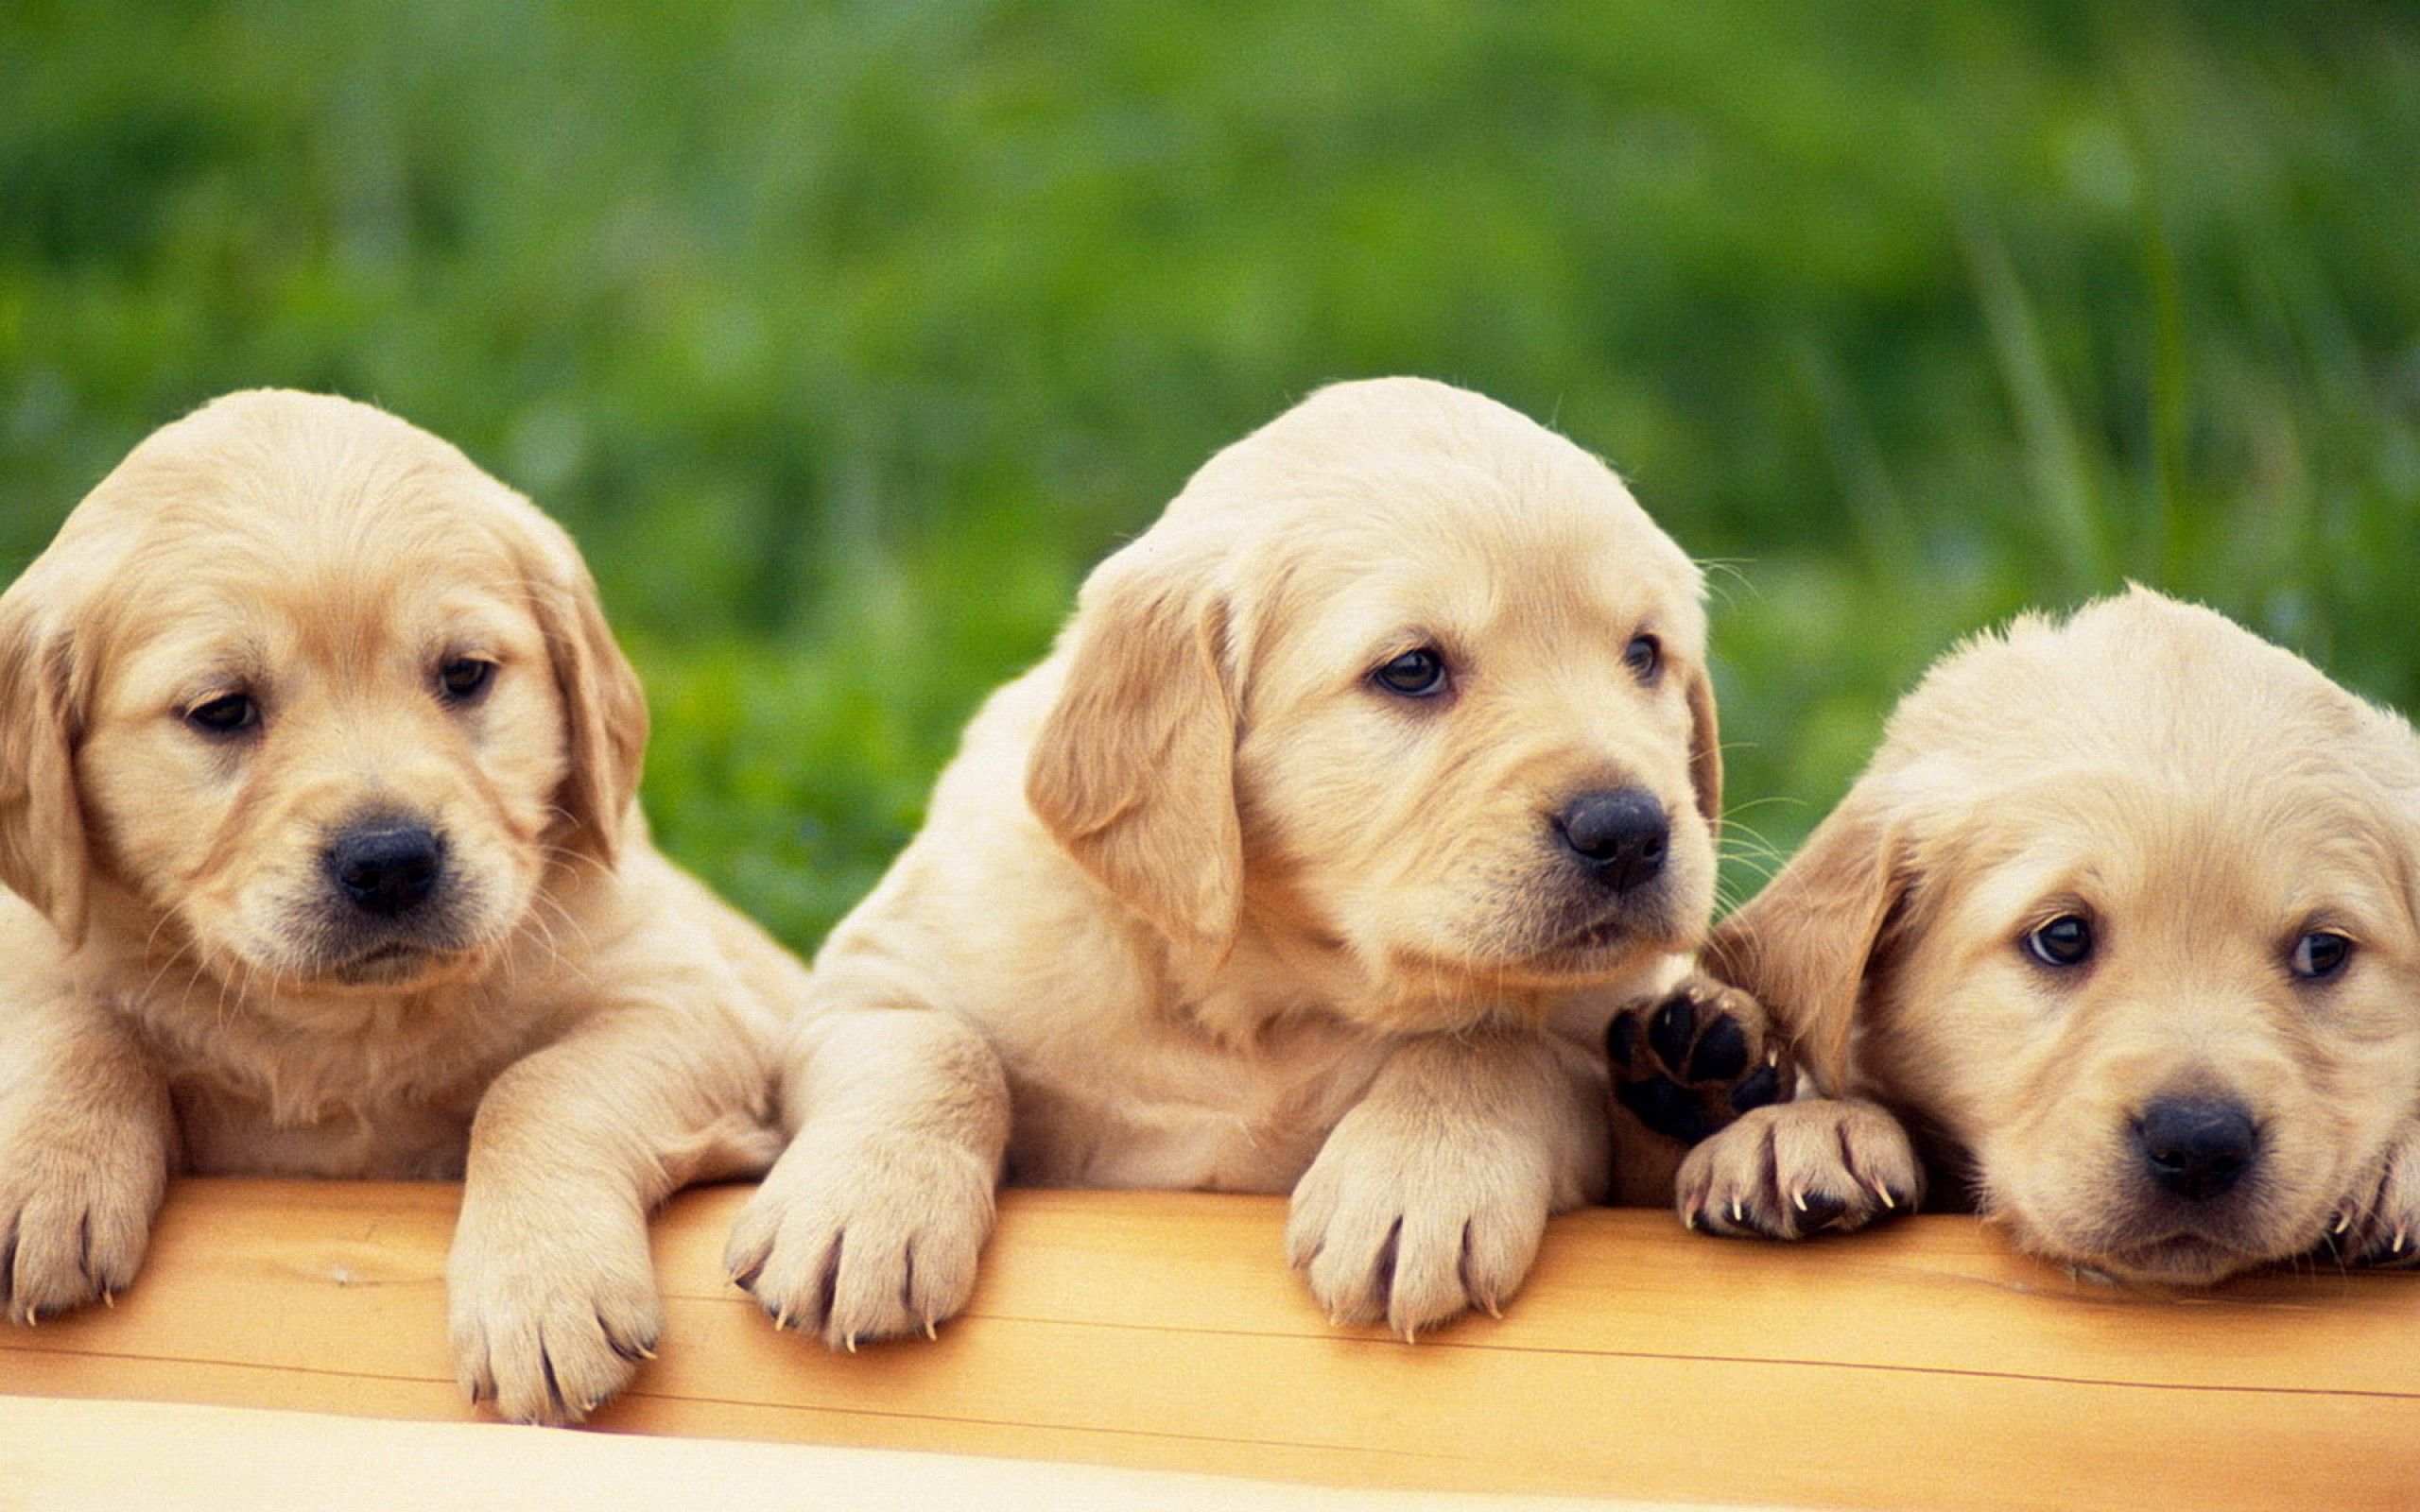 And Click At Link To Download Wallpaper Labrador Puppies For Free